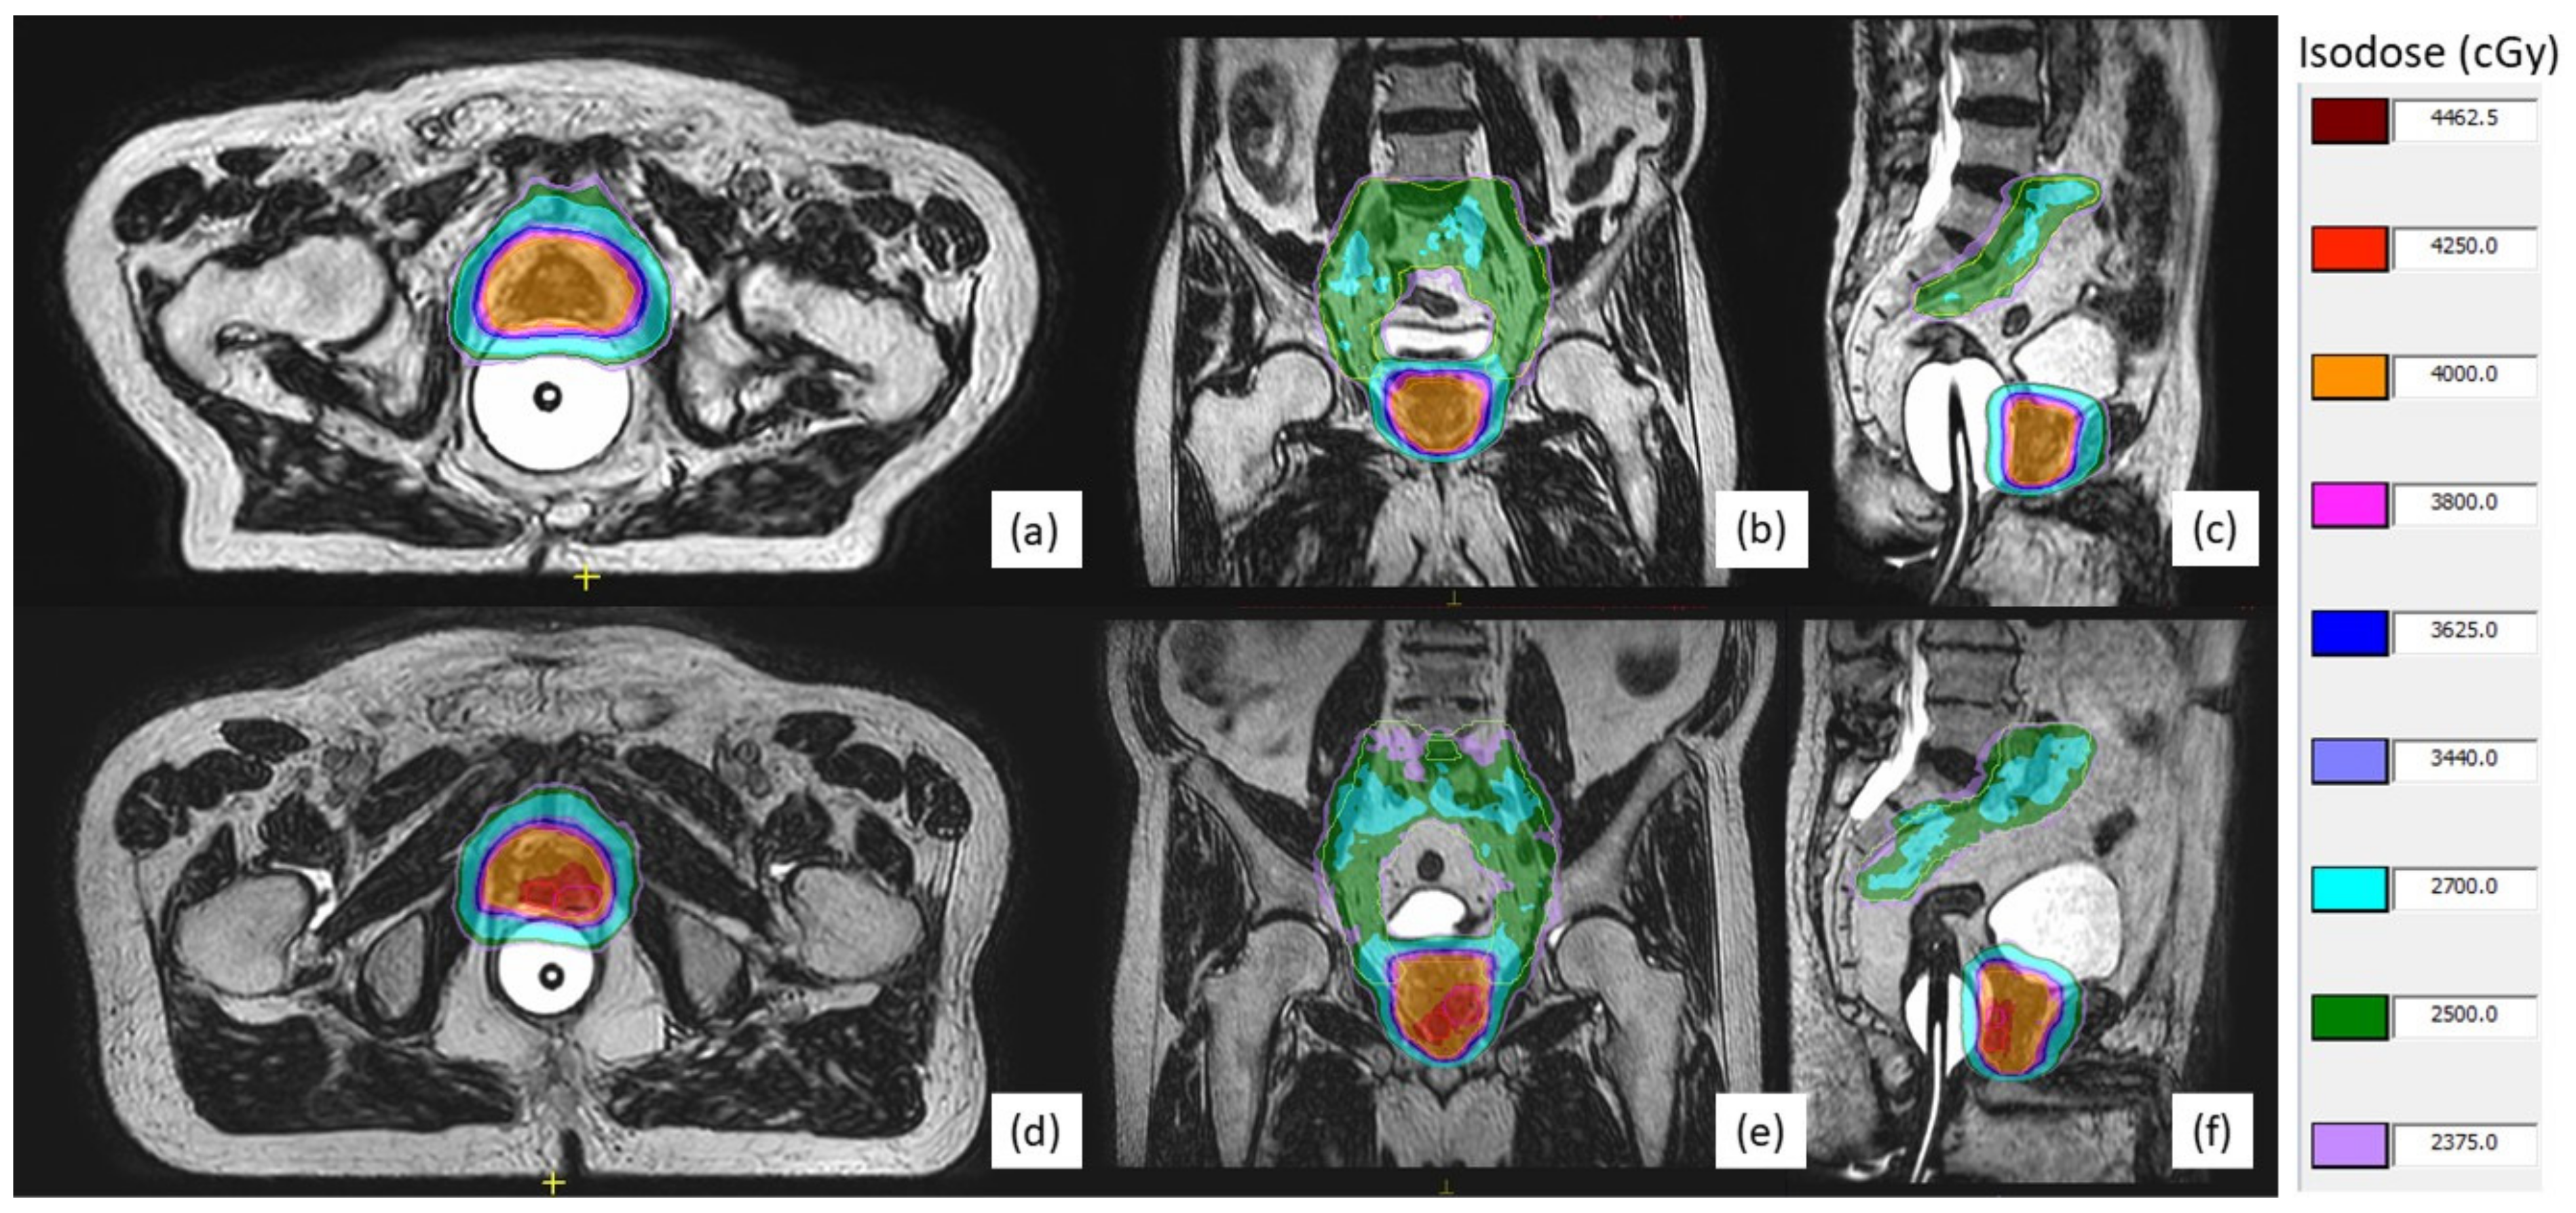 Cancers | Free Full-Text | A Prospective Study of Stereotactic Body  Radiotherapy (SBRT) with Concomitant Whole-Pelvic Radiotherapy (WPRT) for  High-Risk Localized Prostate Cancer Patients Using 1.5 Tesla Magnetic  Resonance Guidance: The Preliminary